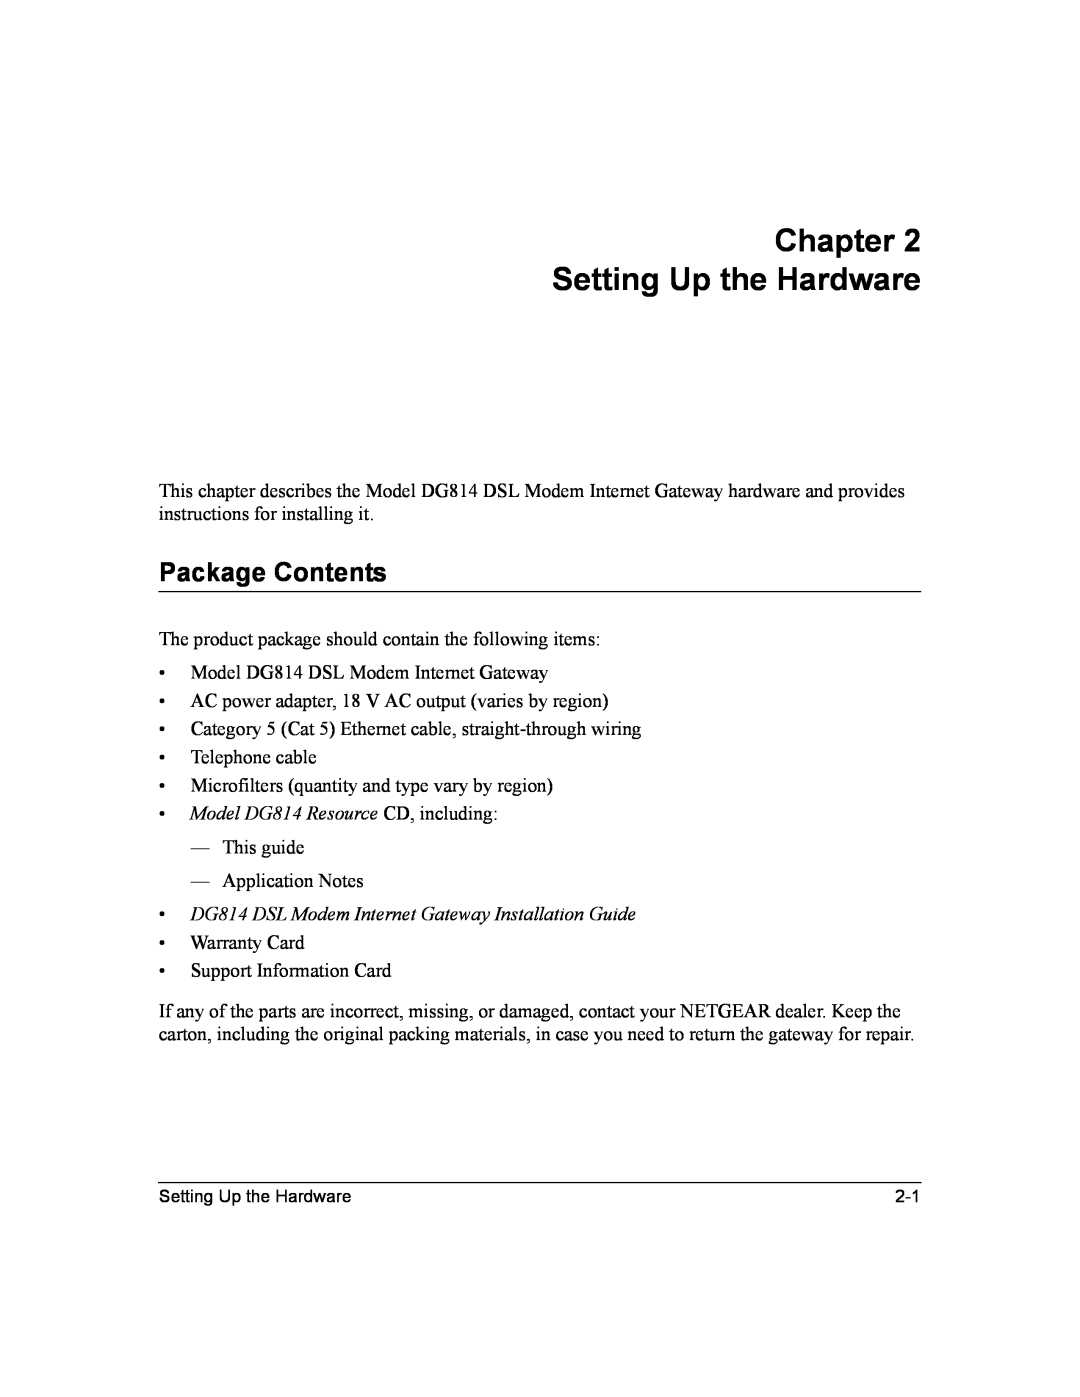 NETGEAR DG814 DSL manual Chapter Setting Up the Hardware, Package Contents 